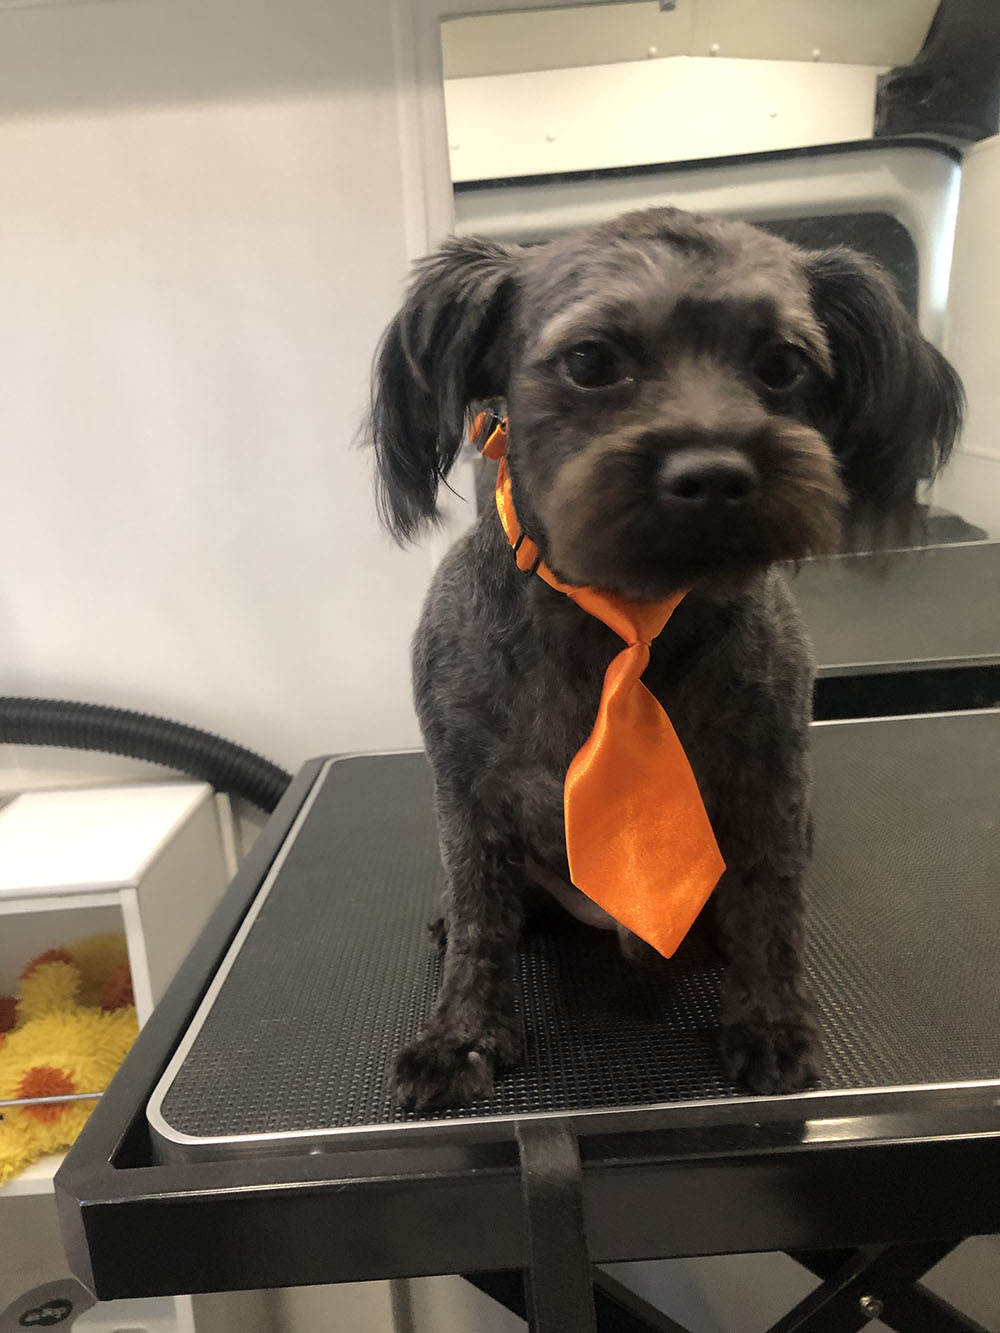 A Dog With Black Color Fur and an Orange Collar